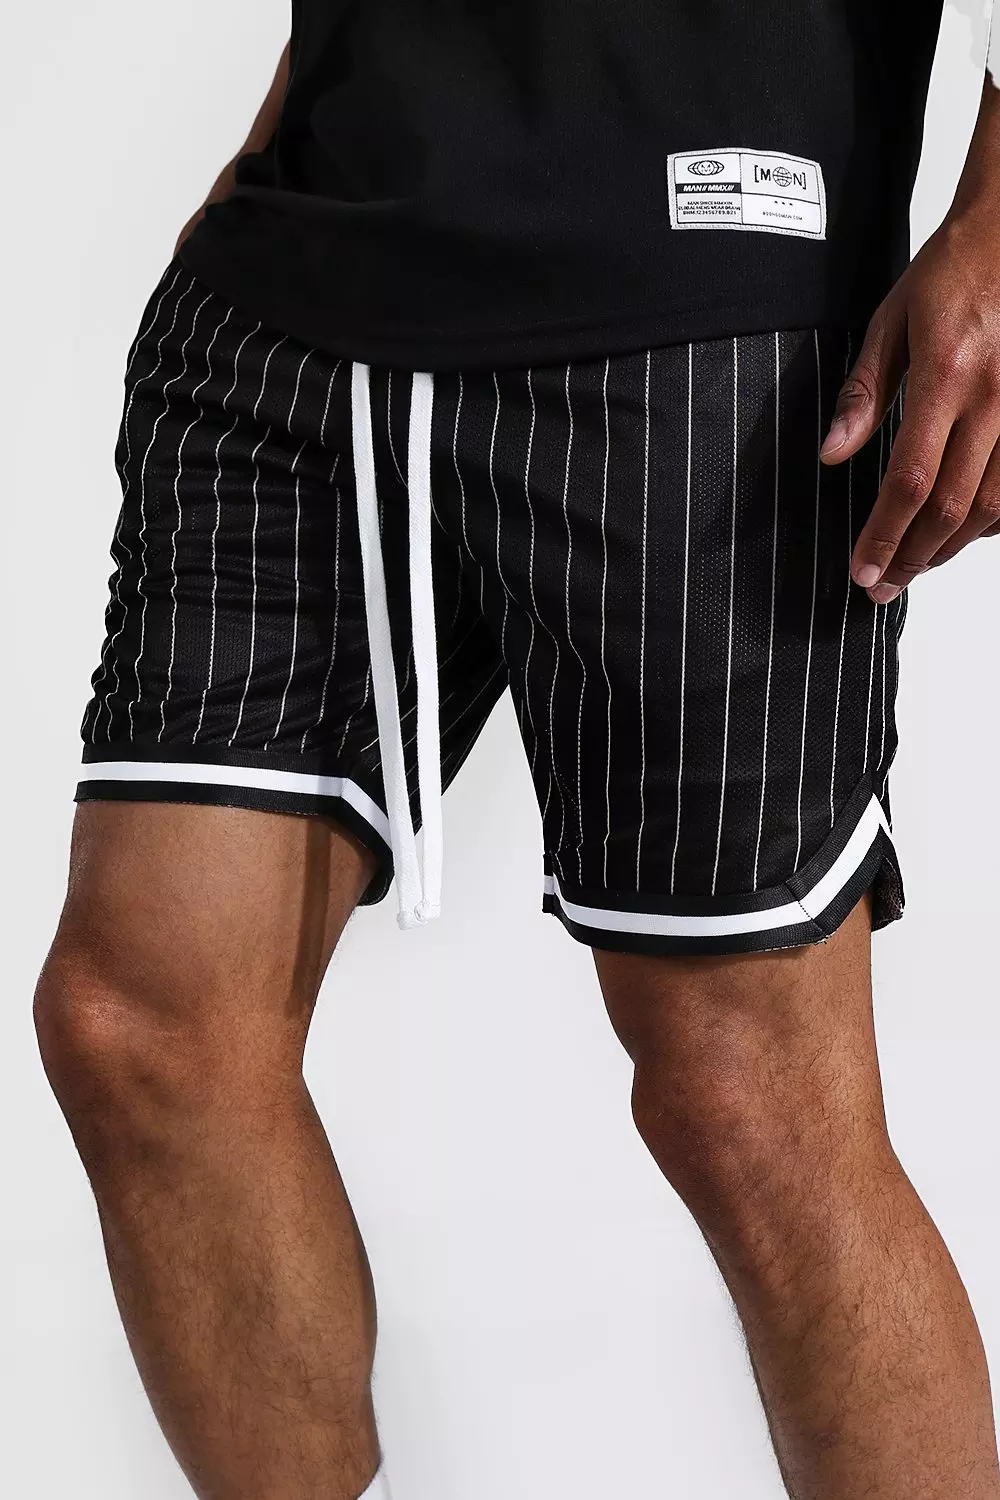 Section8 // Pinstripe Basketball Shorts Available in-store & web